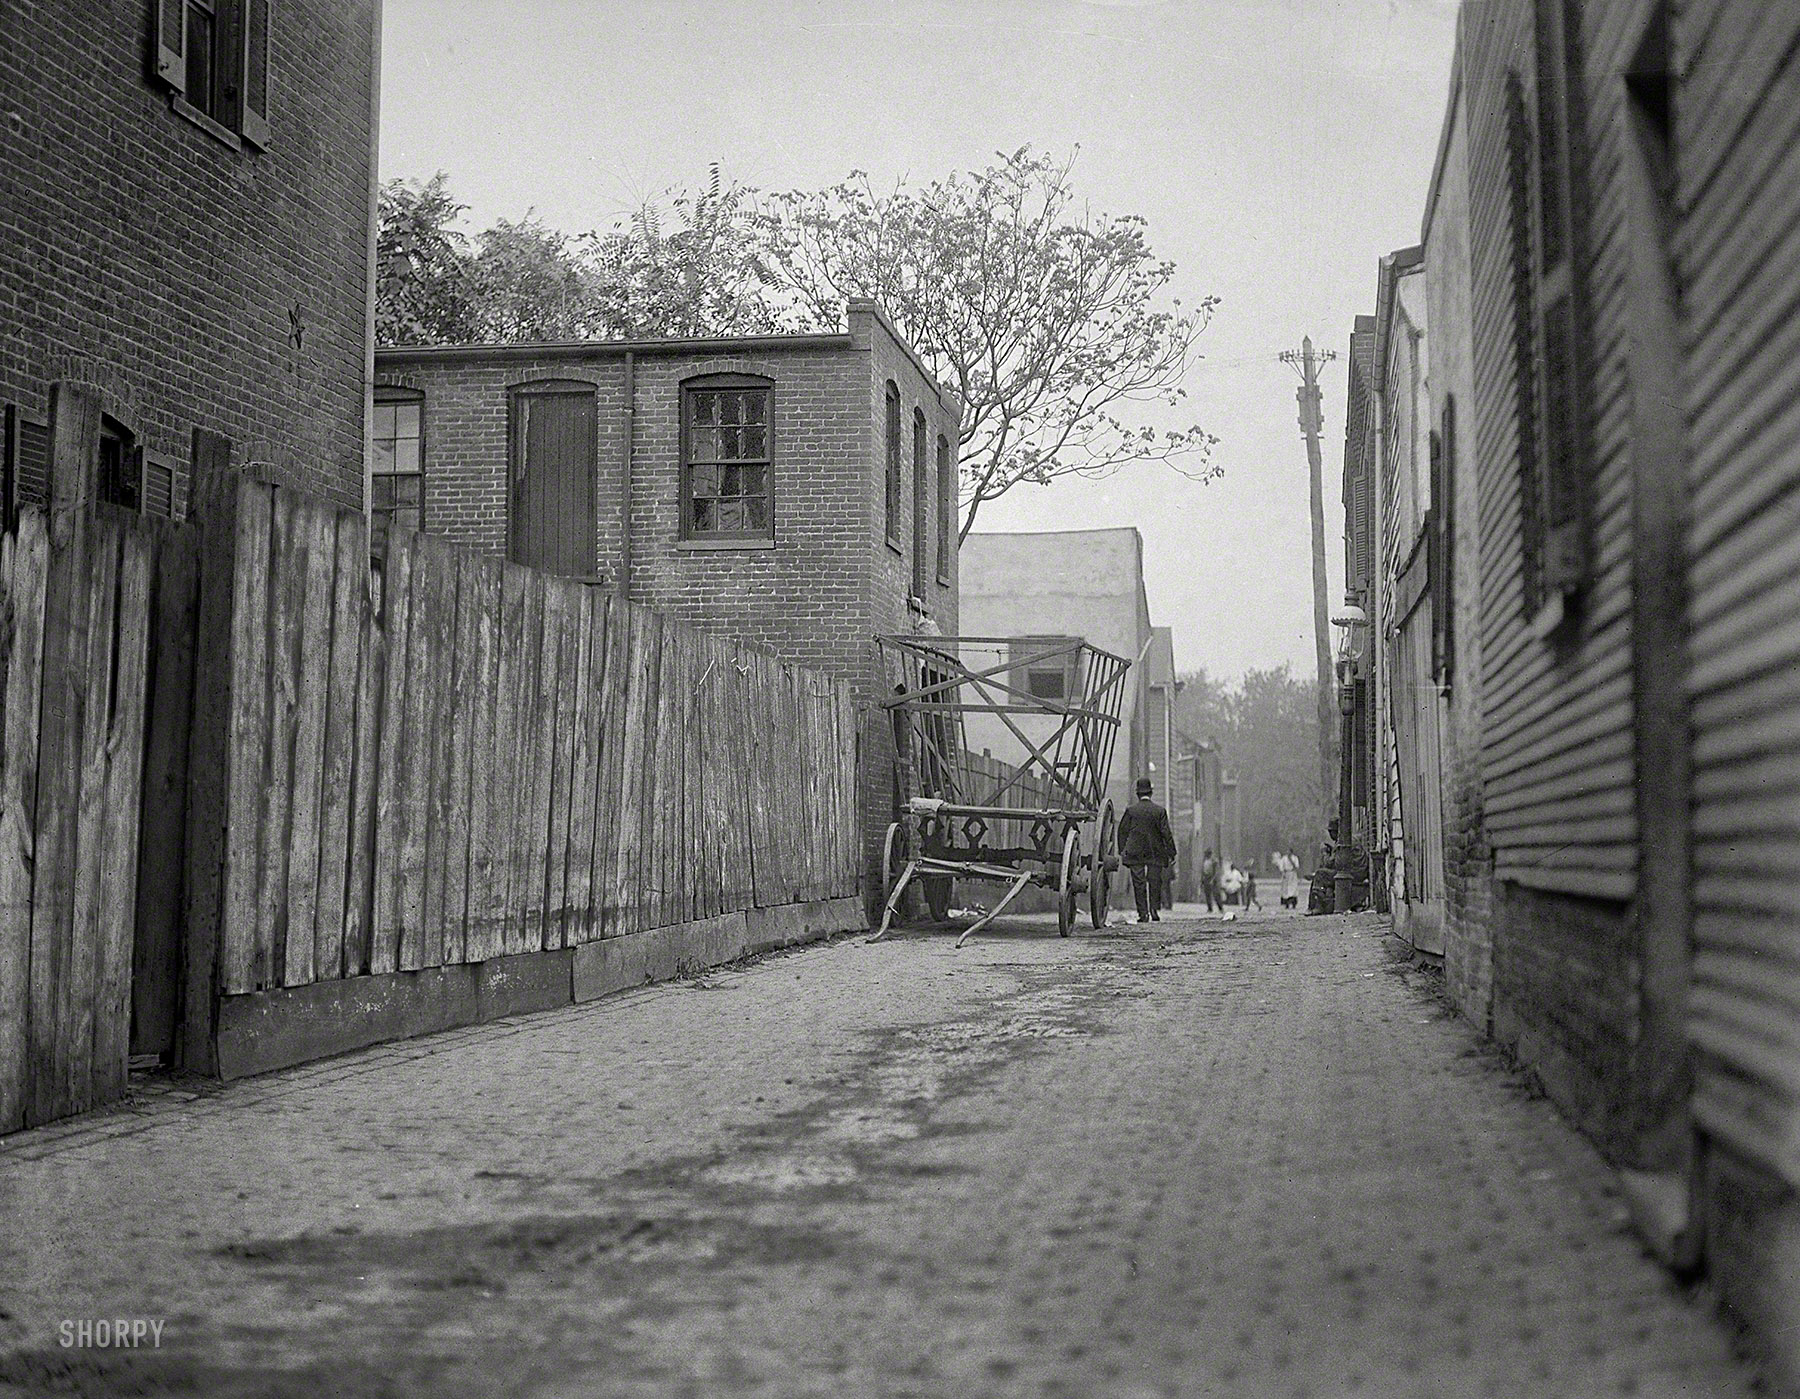 Washington, D.C., 1914. "Alley clearance -- slum views." (Seen earlier here.) Familiar fixtures from a century ago include the gas lamp, maypole-style phone pole and a turnbuckle star. Harris & Ewing glass negative. View full size.